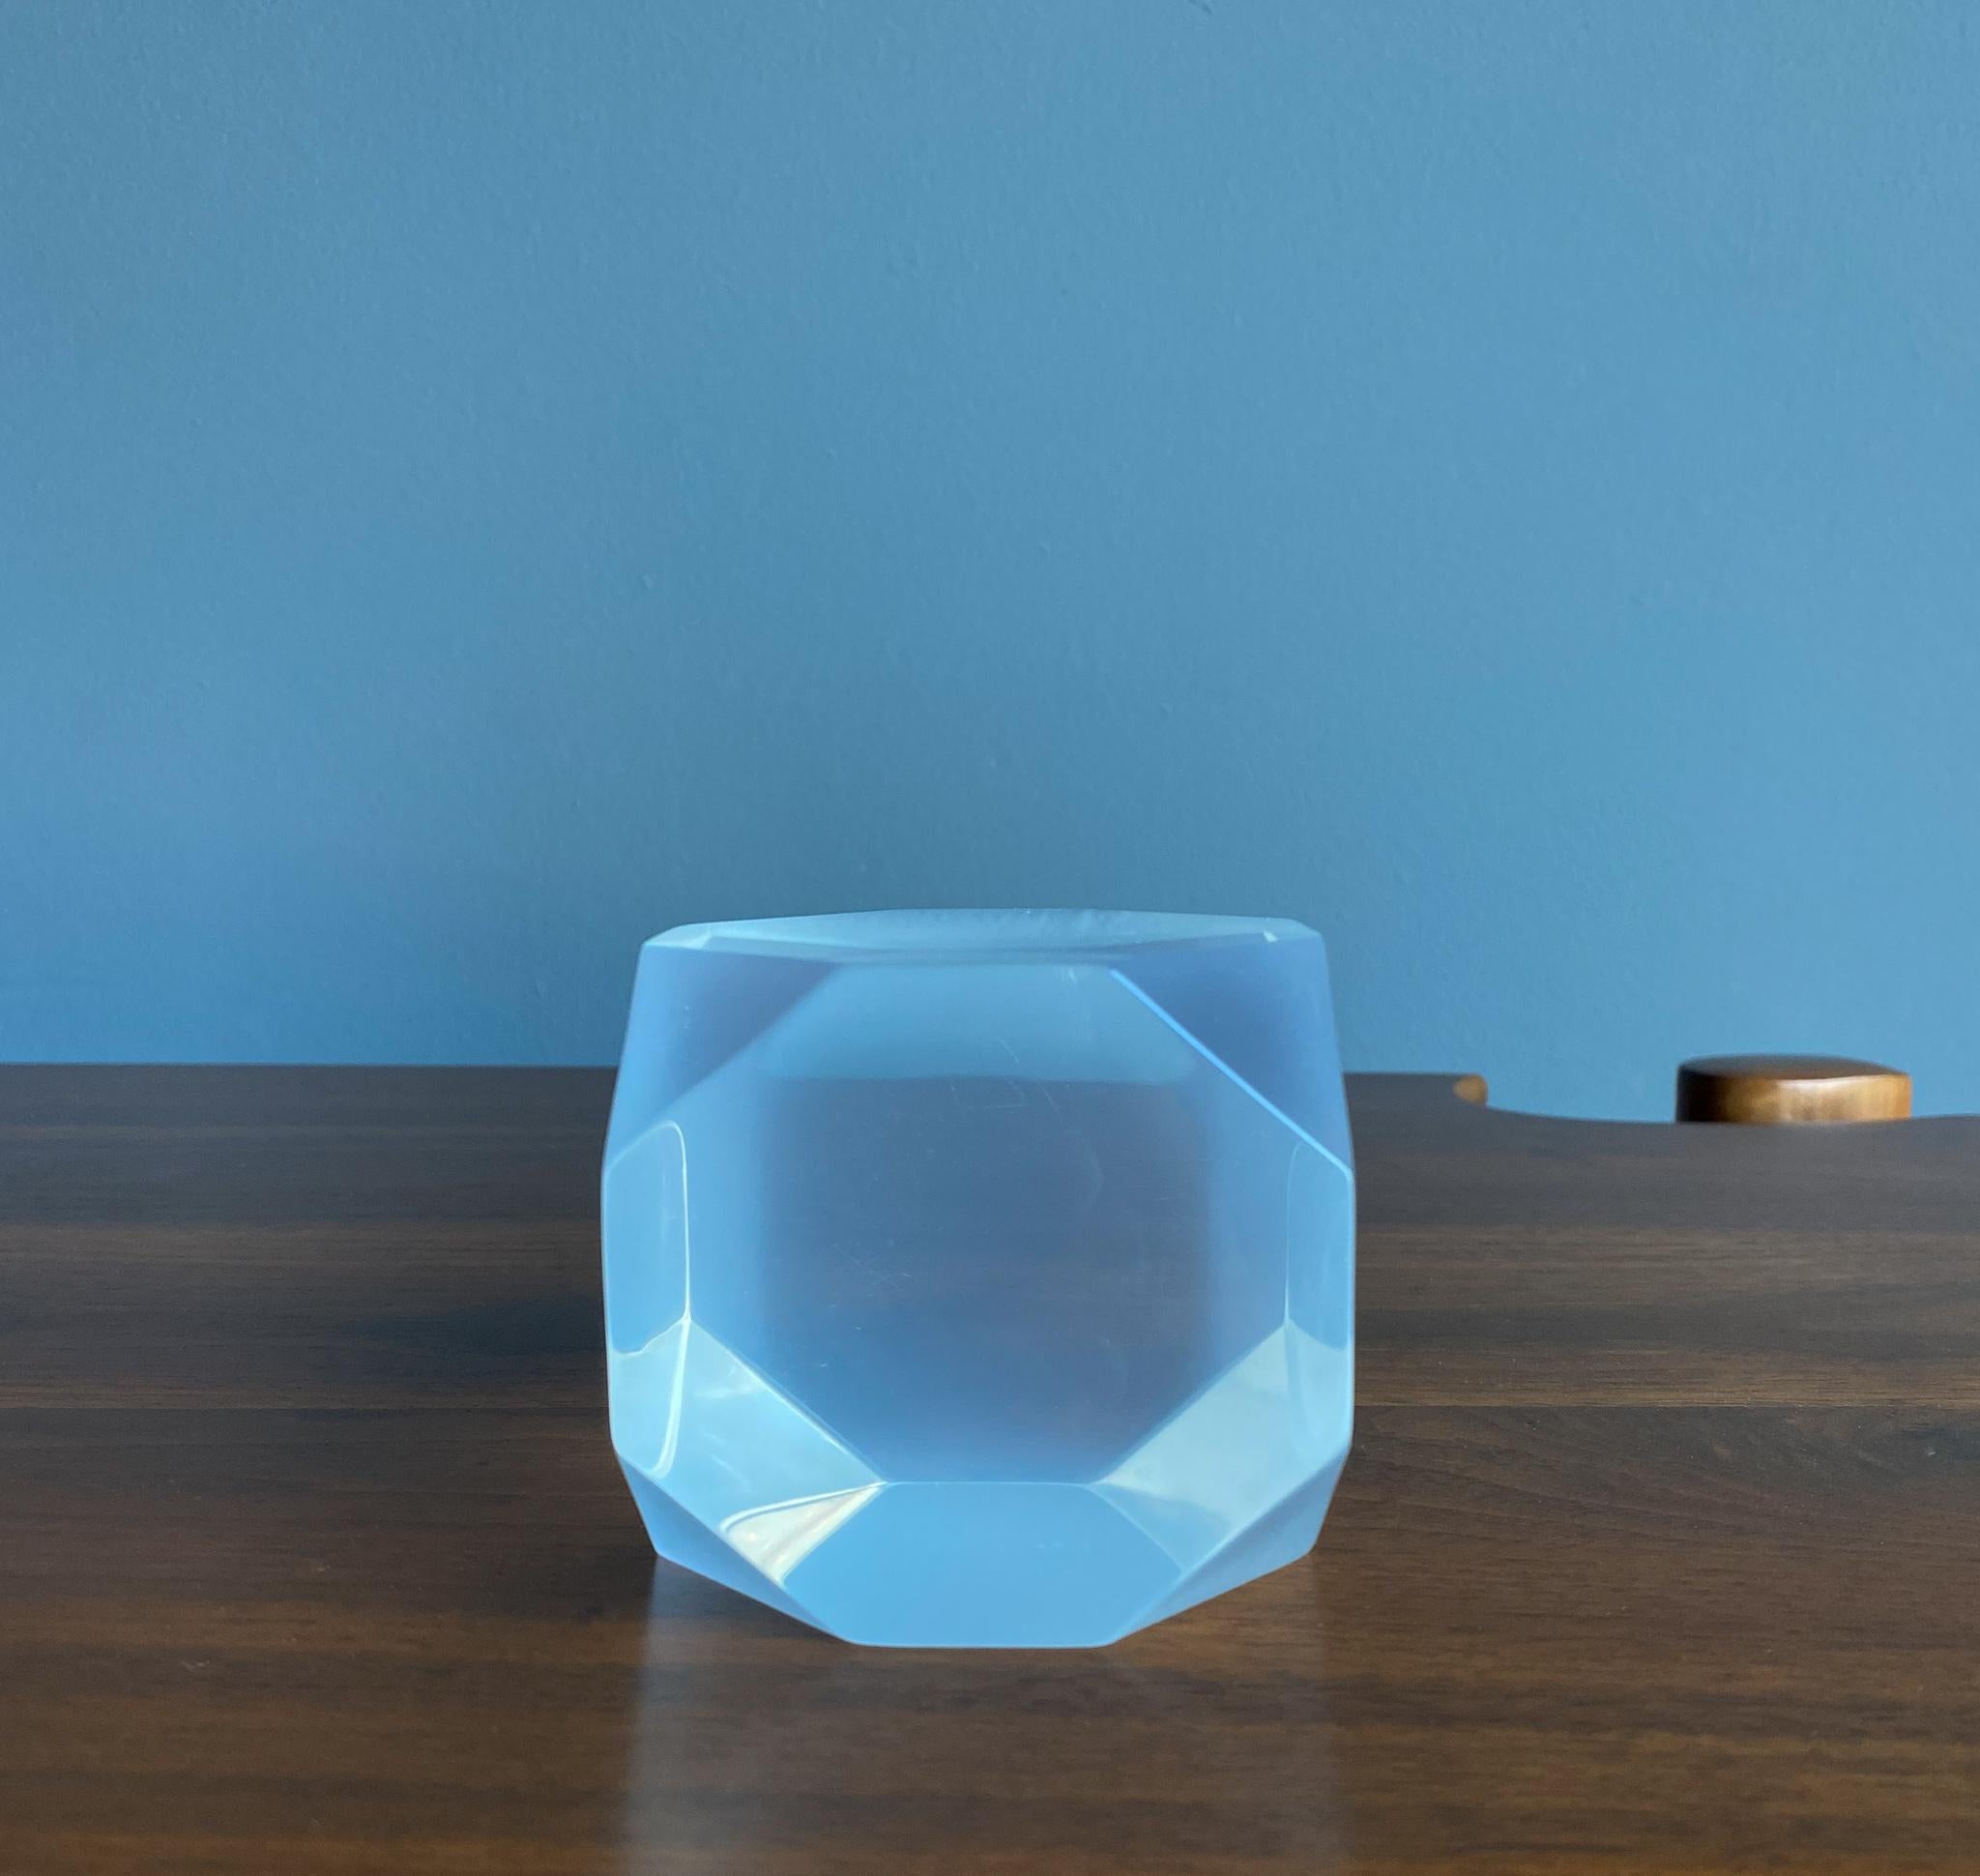 Lucite abstract Geometric table top sculpture / Paperweight, 1980's.